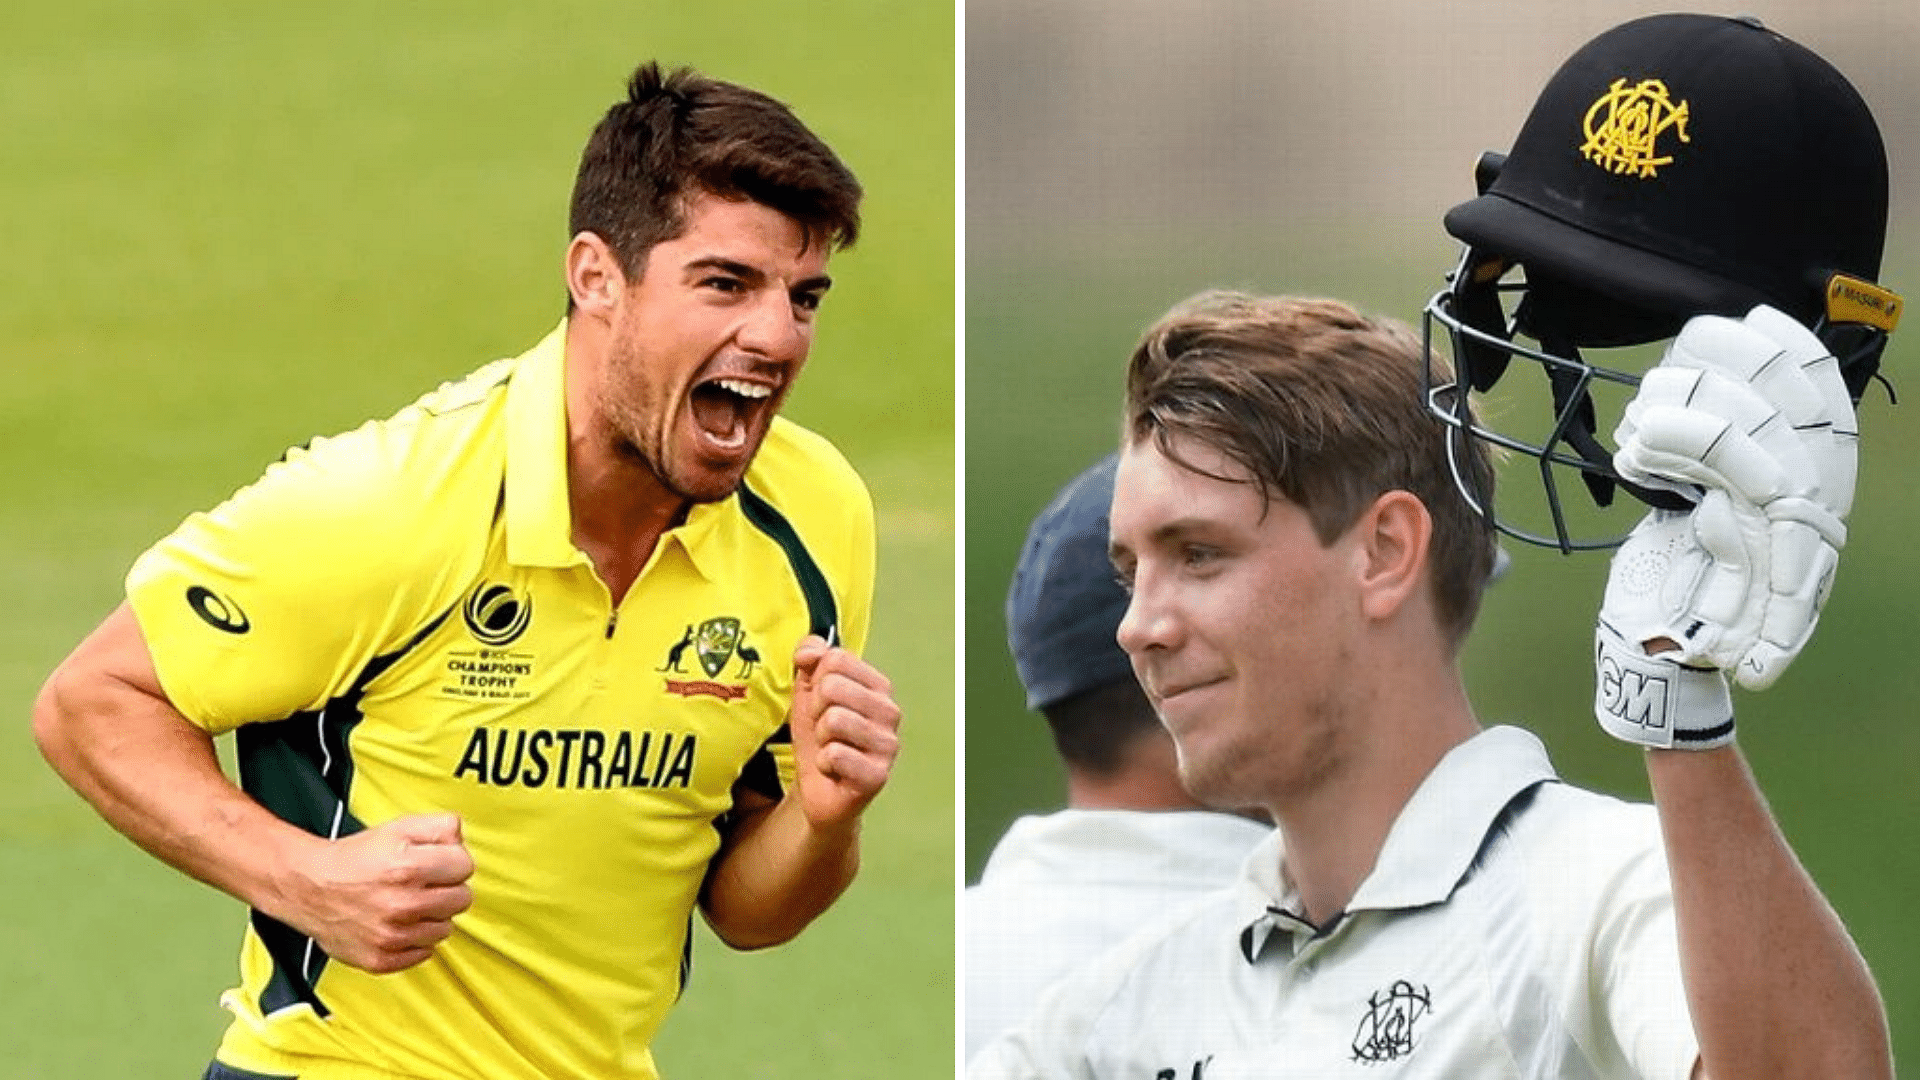 Moises Henriques gets a call-up after three years, while Western Australia all-rounder Cameron Green gets maiden call-up.